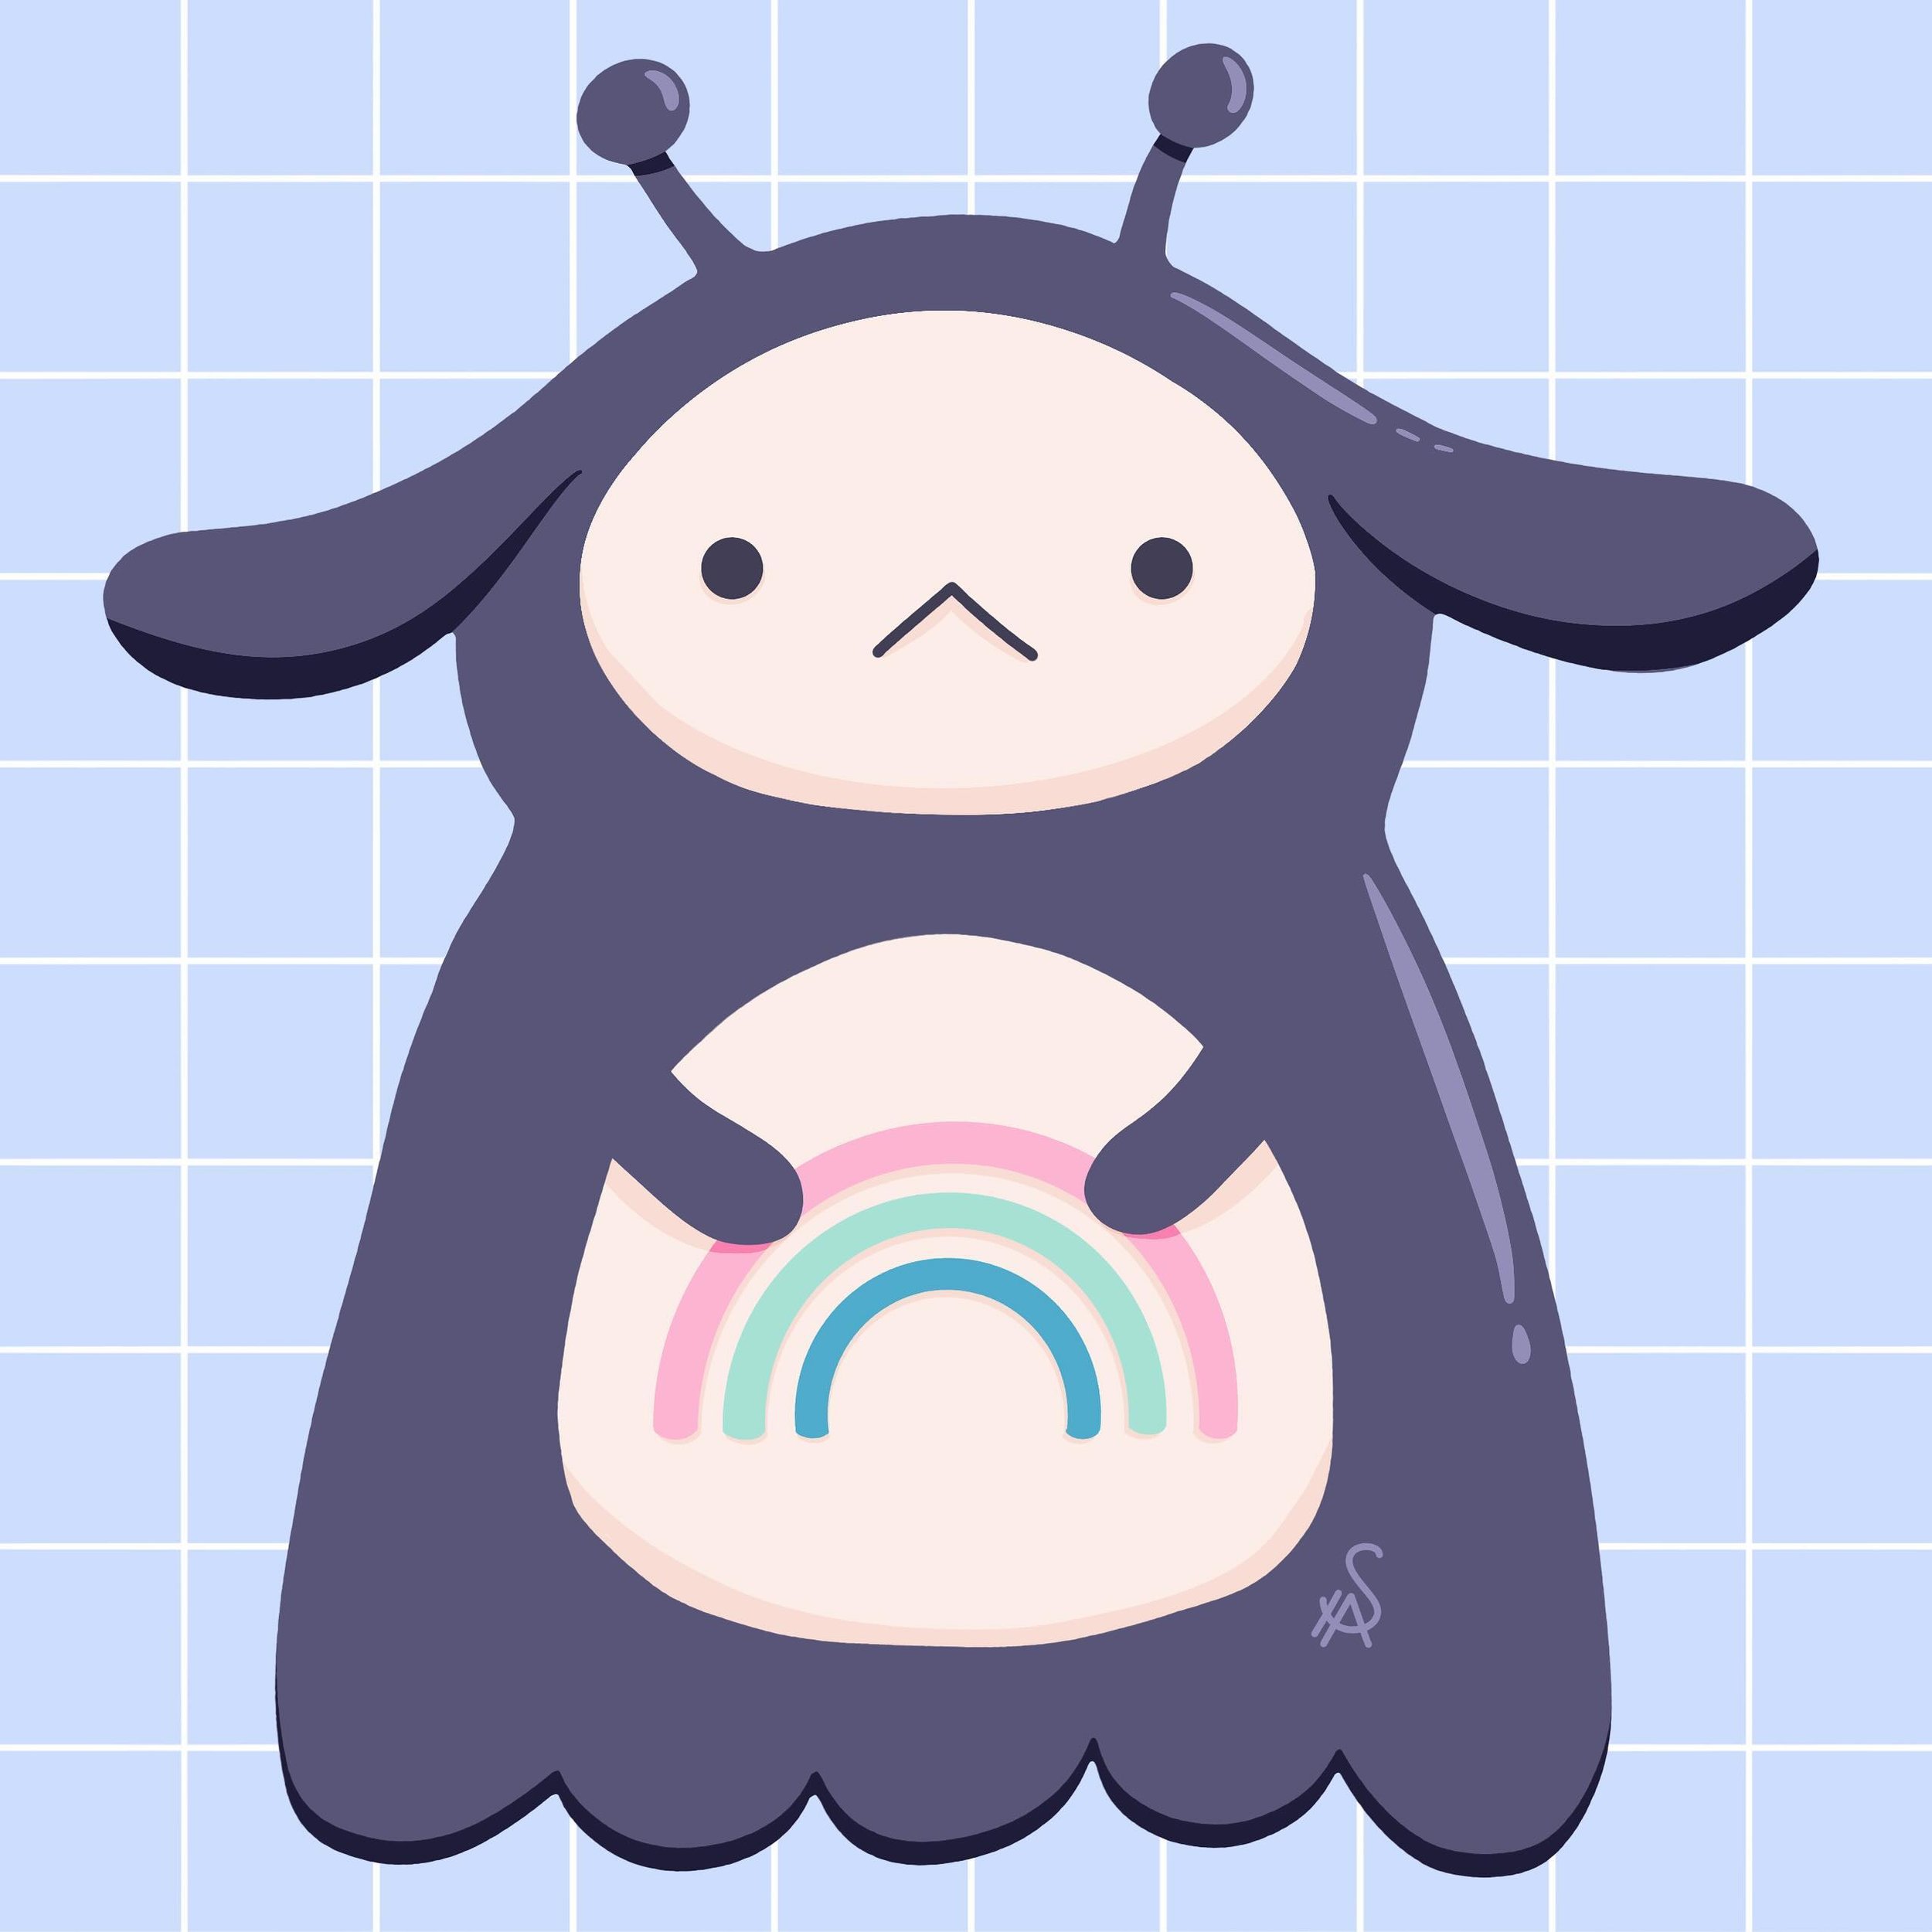 This is my little friend Subli. I named him because he&rsquo;s being used in a sublimation experiment and it&rsquo;s kind of stuck. He&rsquo;s like a little alien care bear.
.
.
.
#artist #digitalillustrations #artistsoninstagram #alienart #kawaiiart